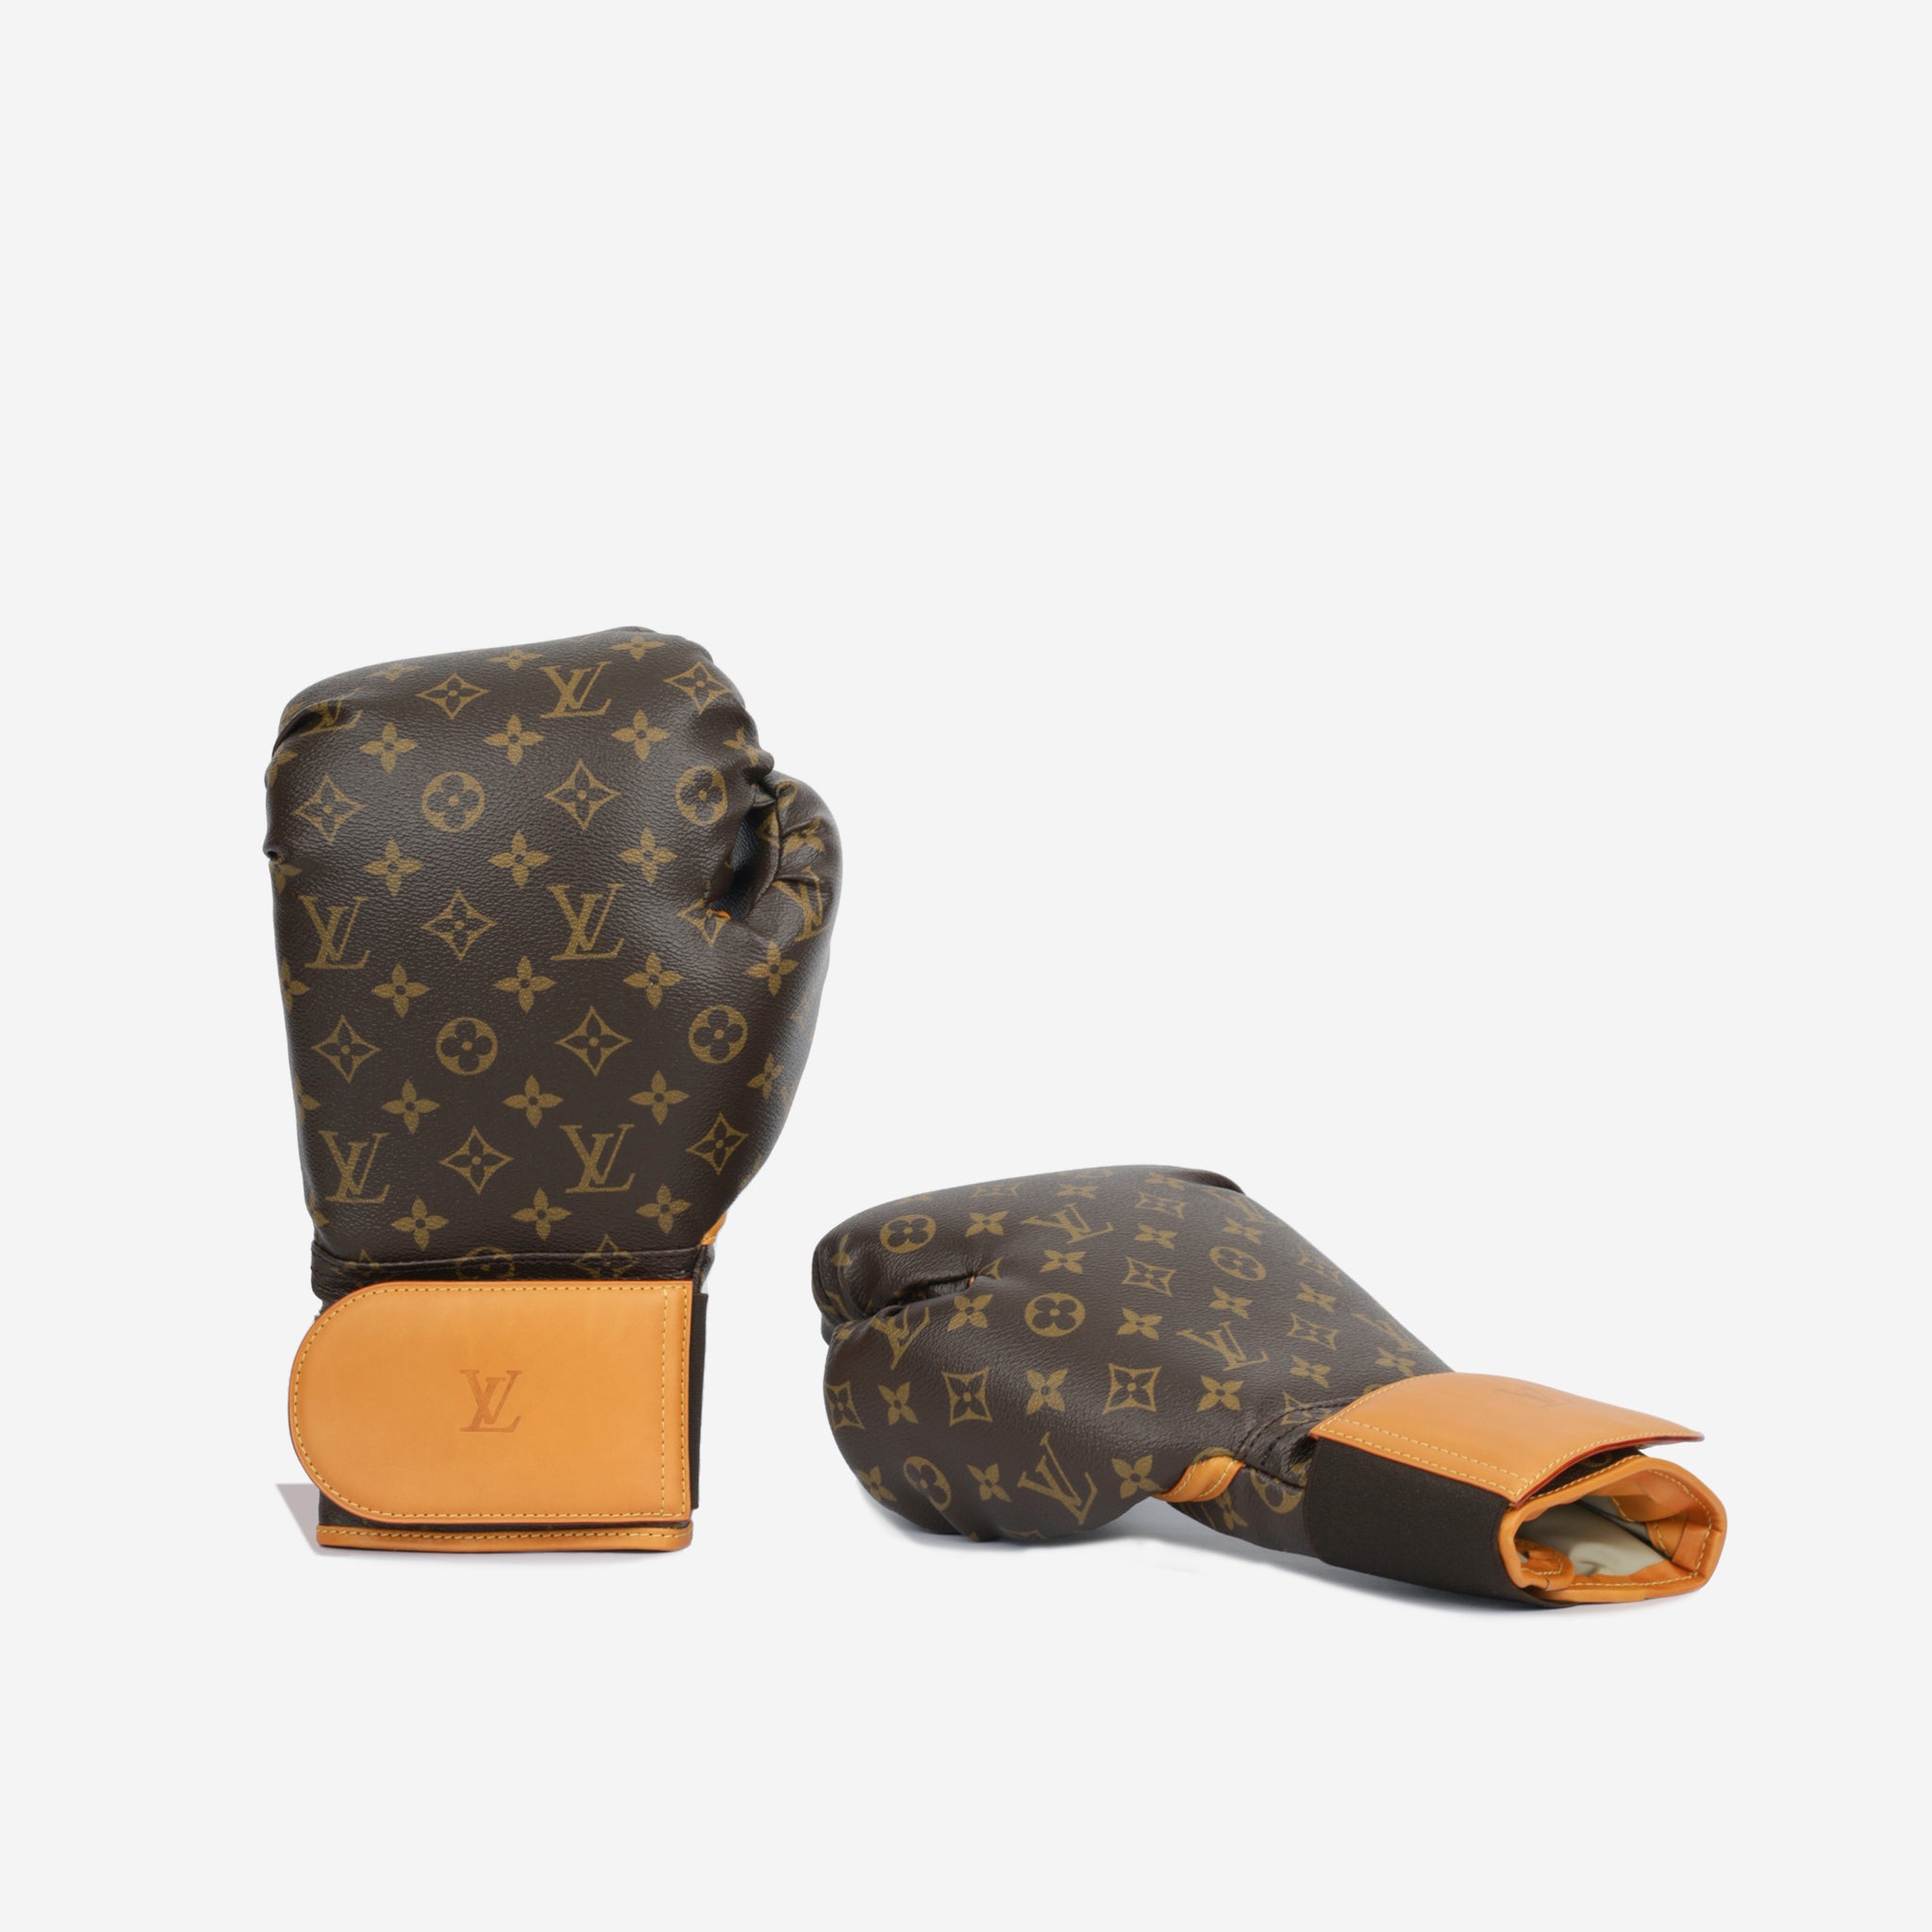 Louis Vuitton boxing gloves by Karl Lagerfeld